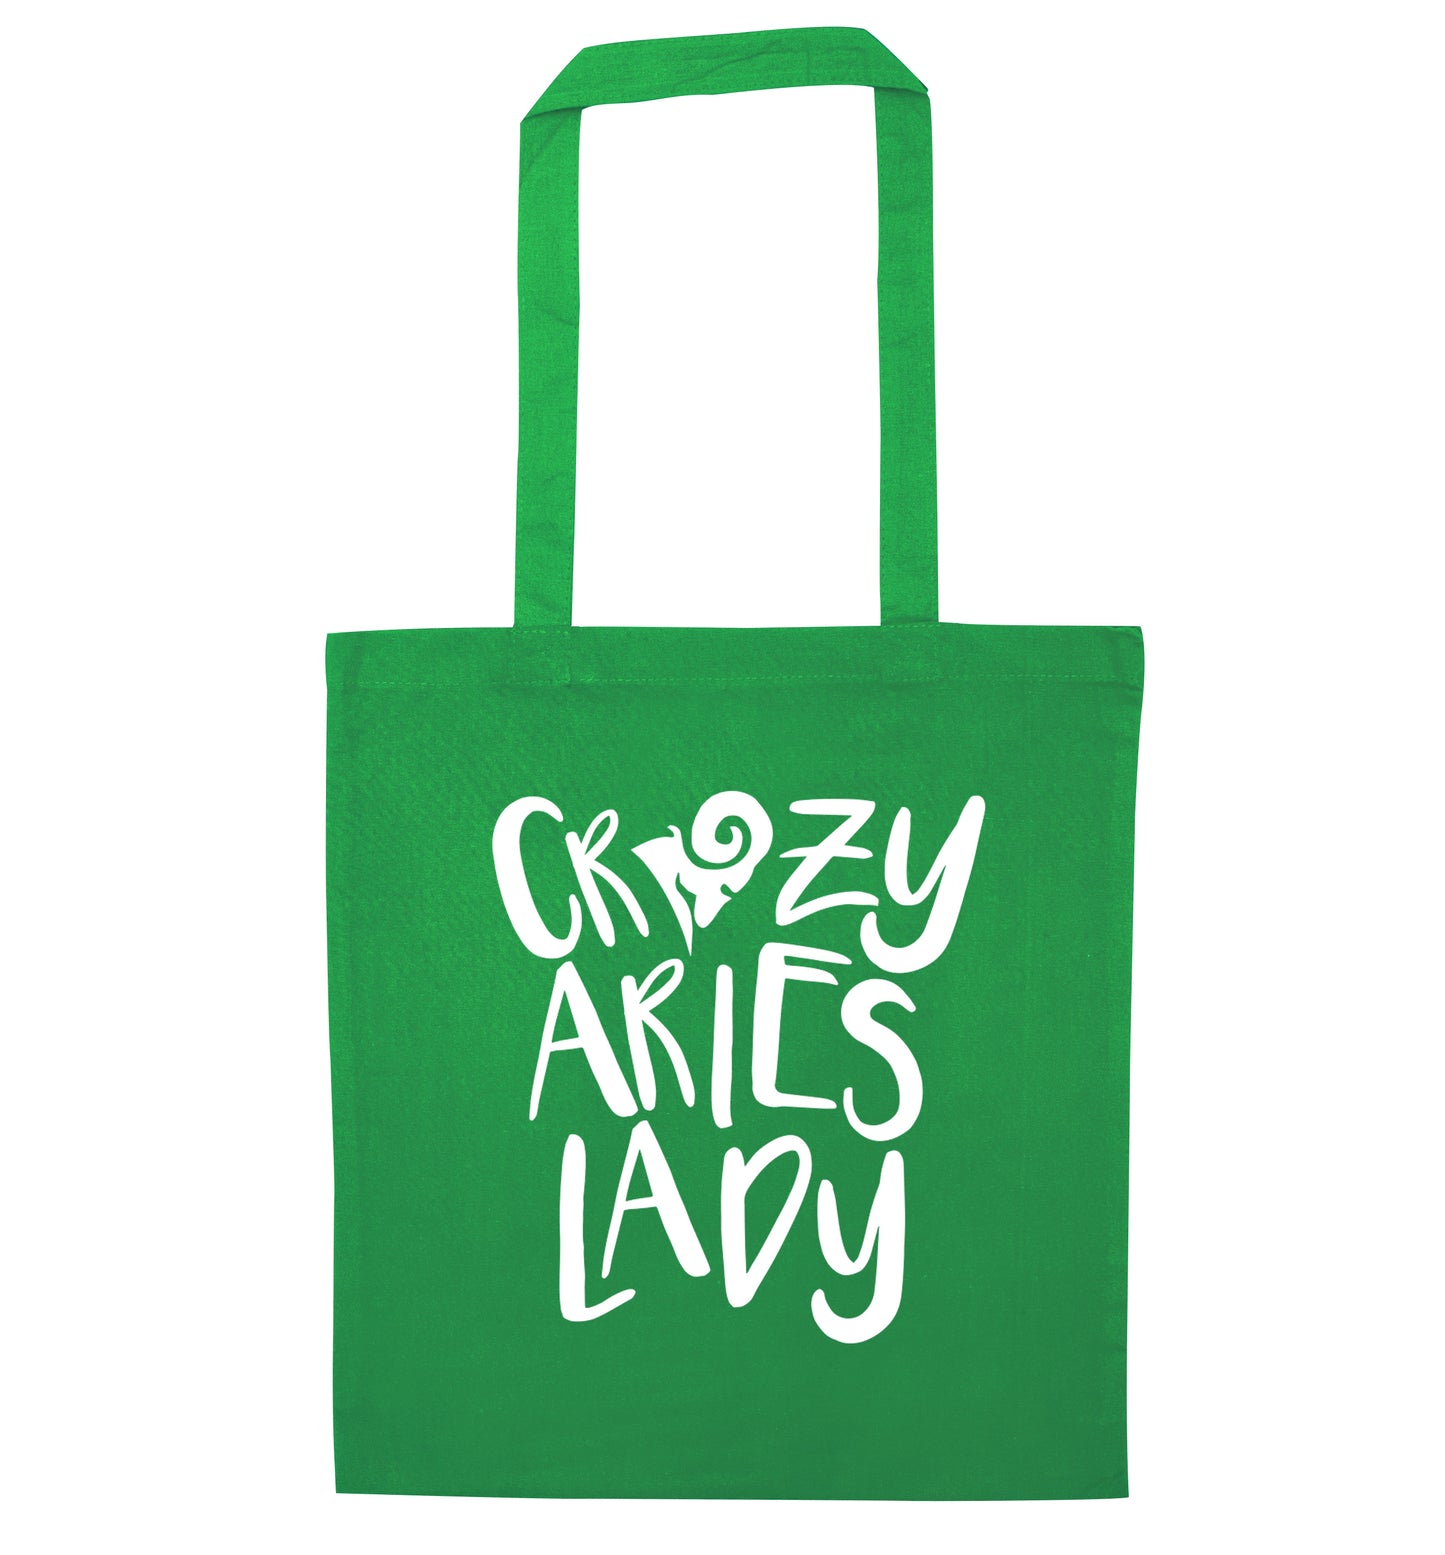 Crazy aries lady green tote bag